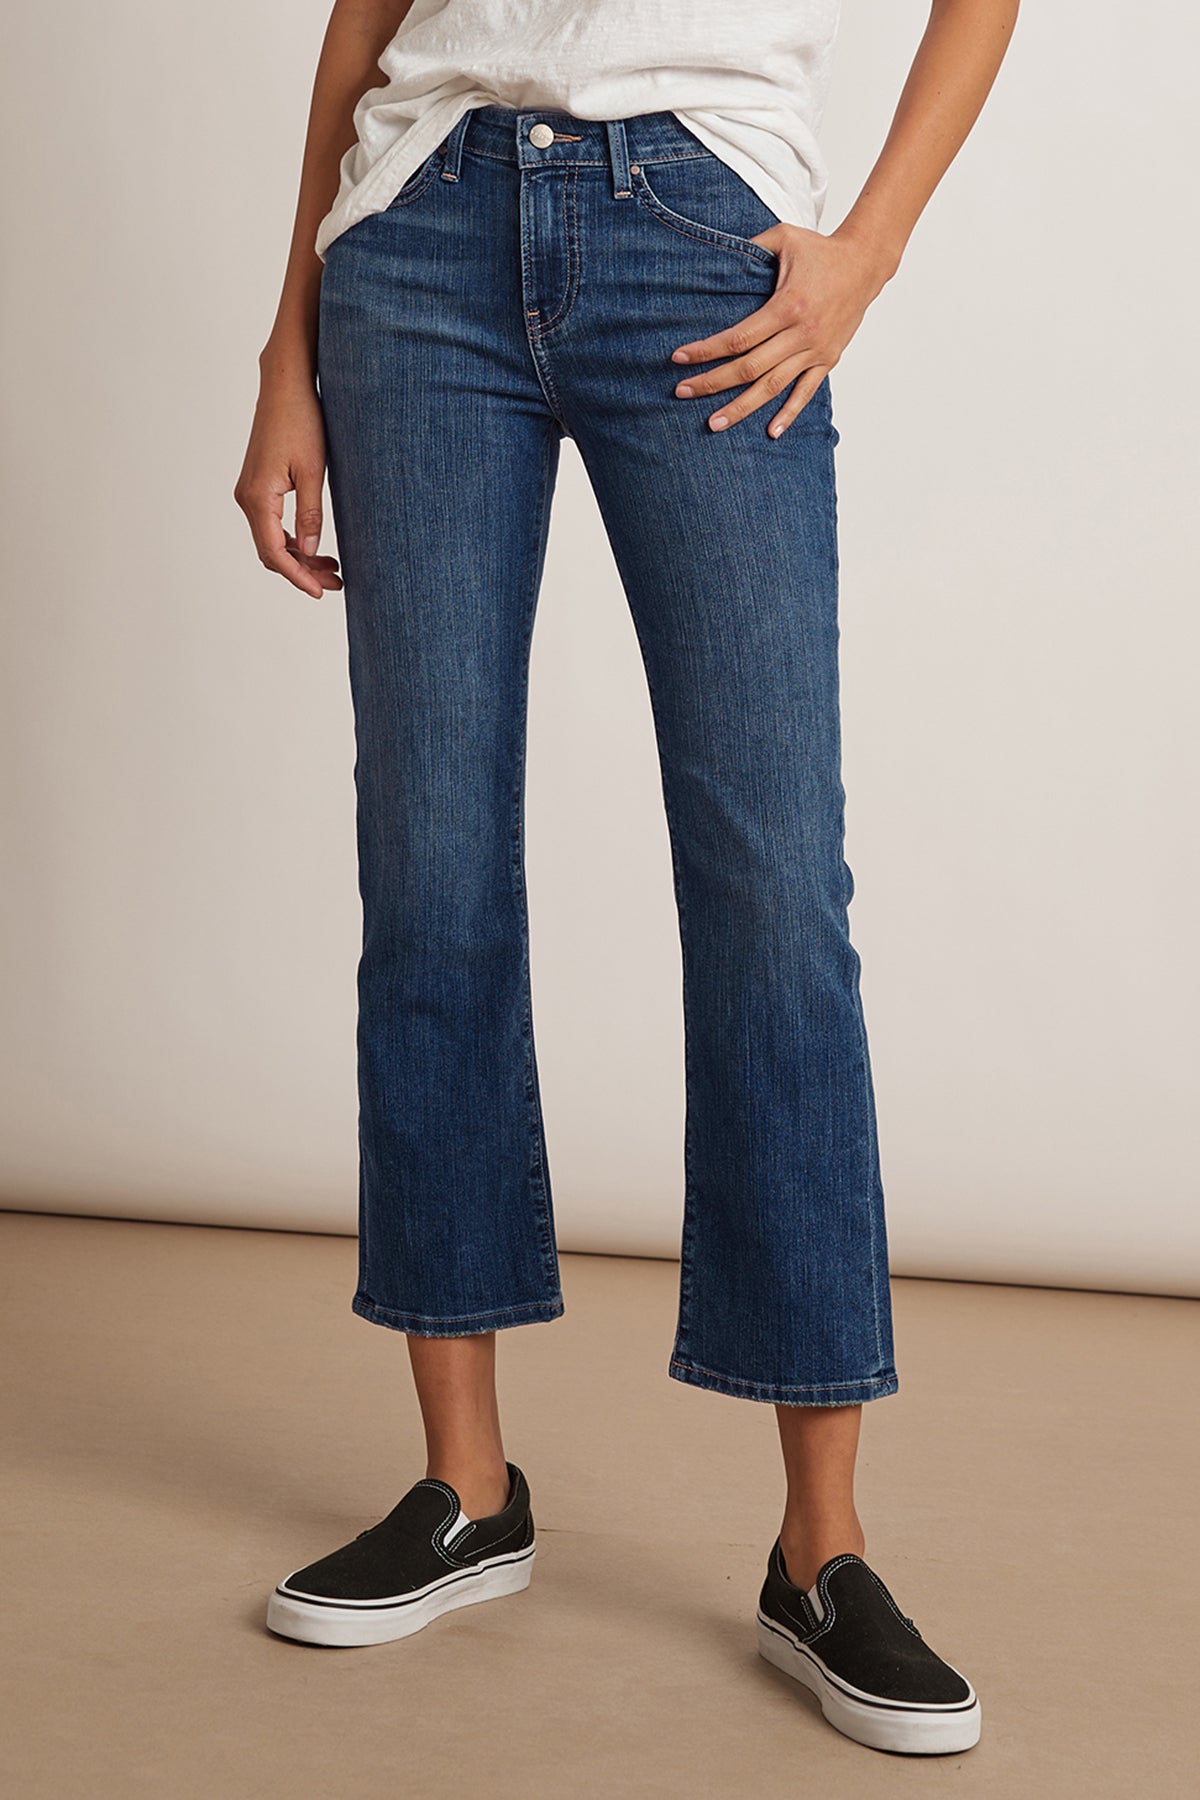 A woman wearing a pair of Velvet by Graham & Spencer KATE HIGH RISE CROP JEANS and a white t-shirt.-17625714360513